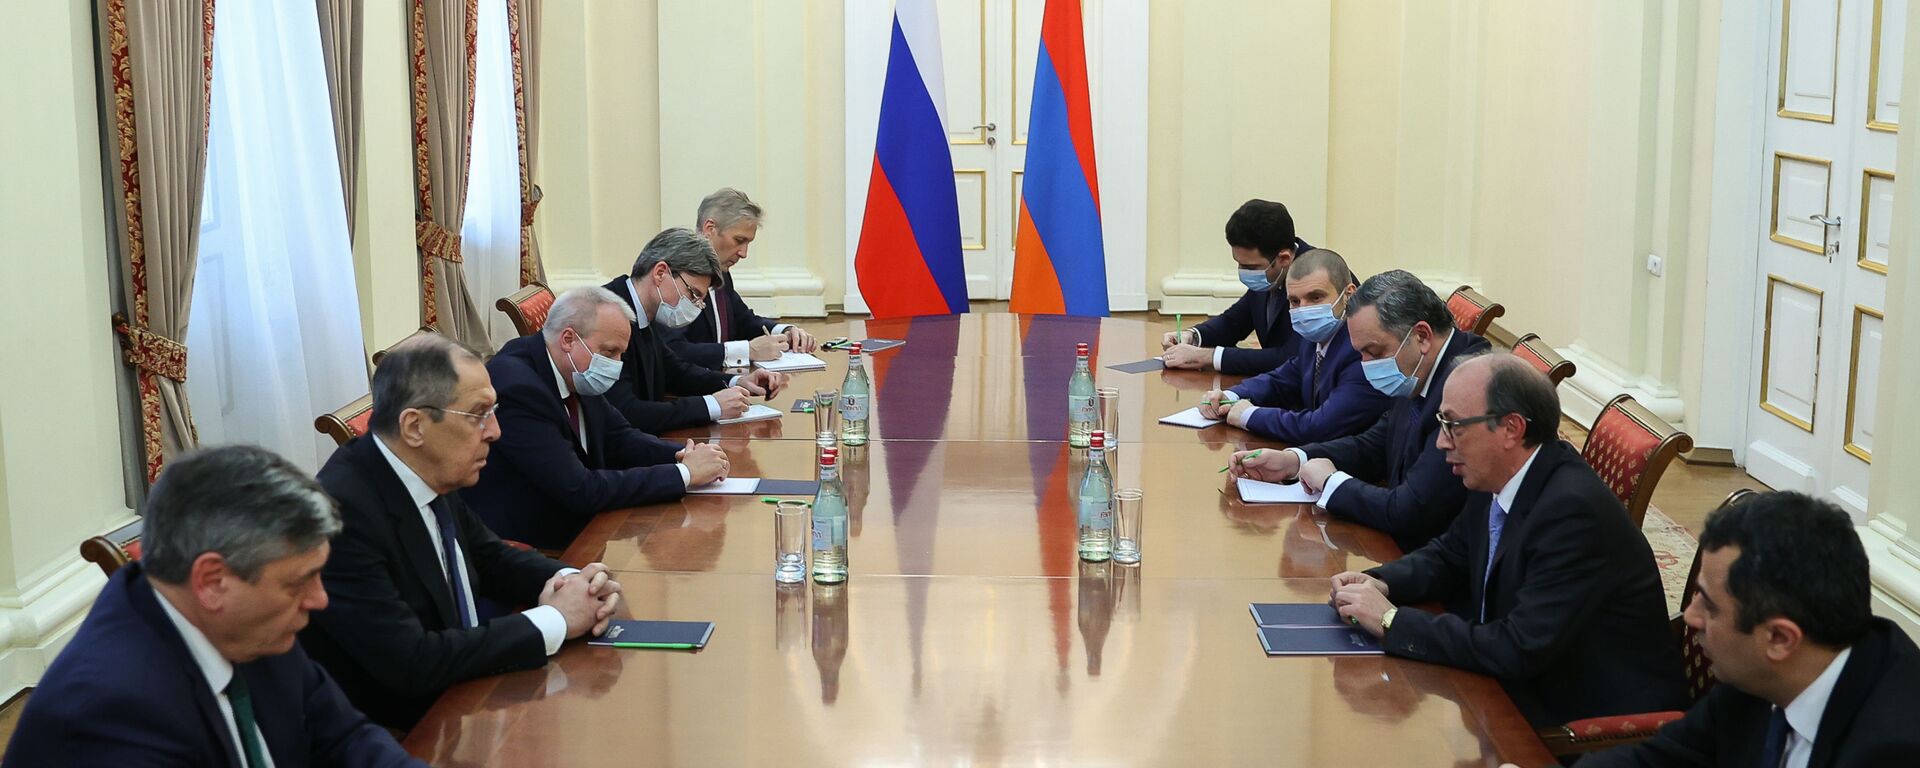 In this handout photo released by Russian Foreign Ministry, Russian Foreign Minister Sergei Lavrov attends a meeting with his Armenian counterpart Ara Aivazian, in Yerevan, Armenia - Sputnik International, 1920, 13.09.2022